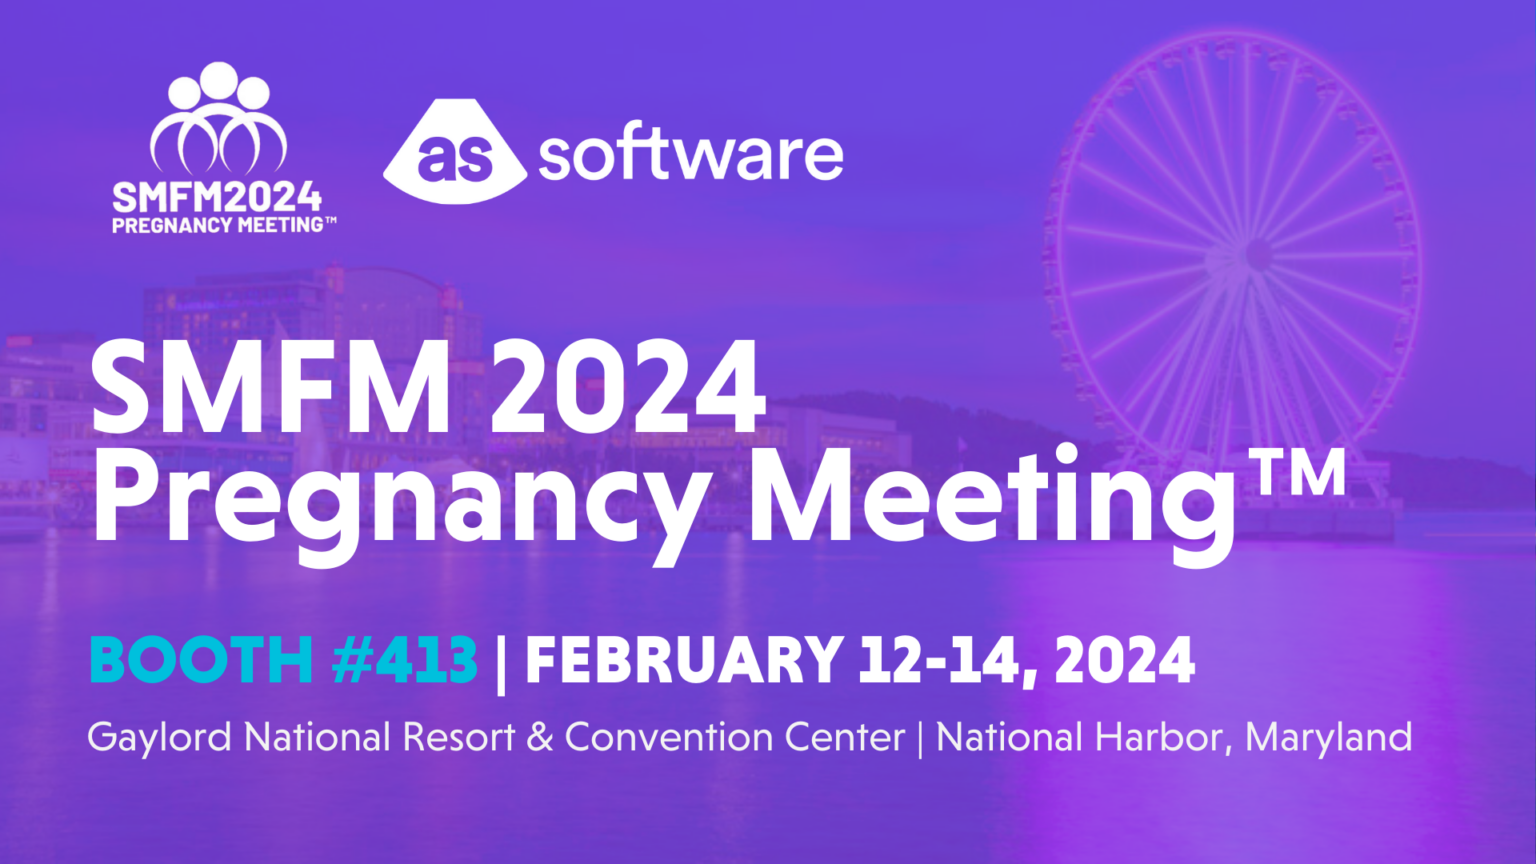 SMFM 2024 Pregnancy Meeting™ AS Software